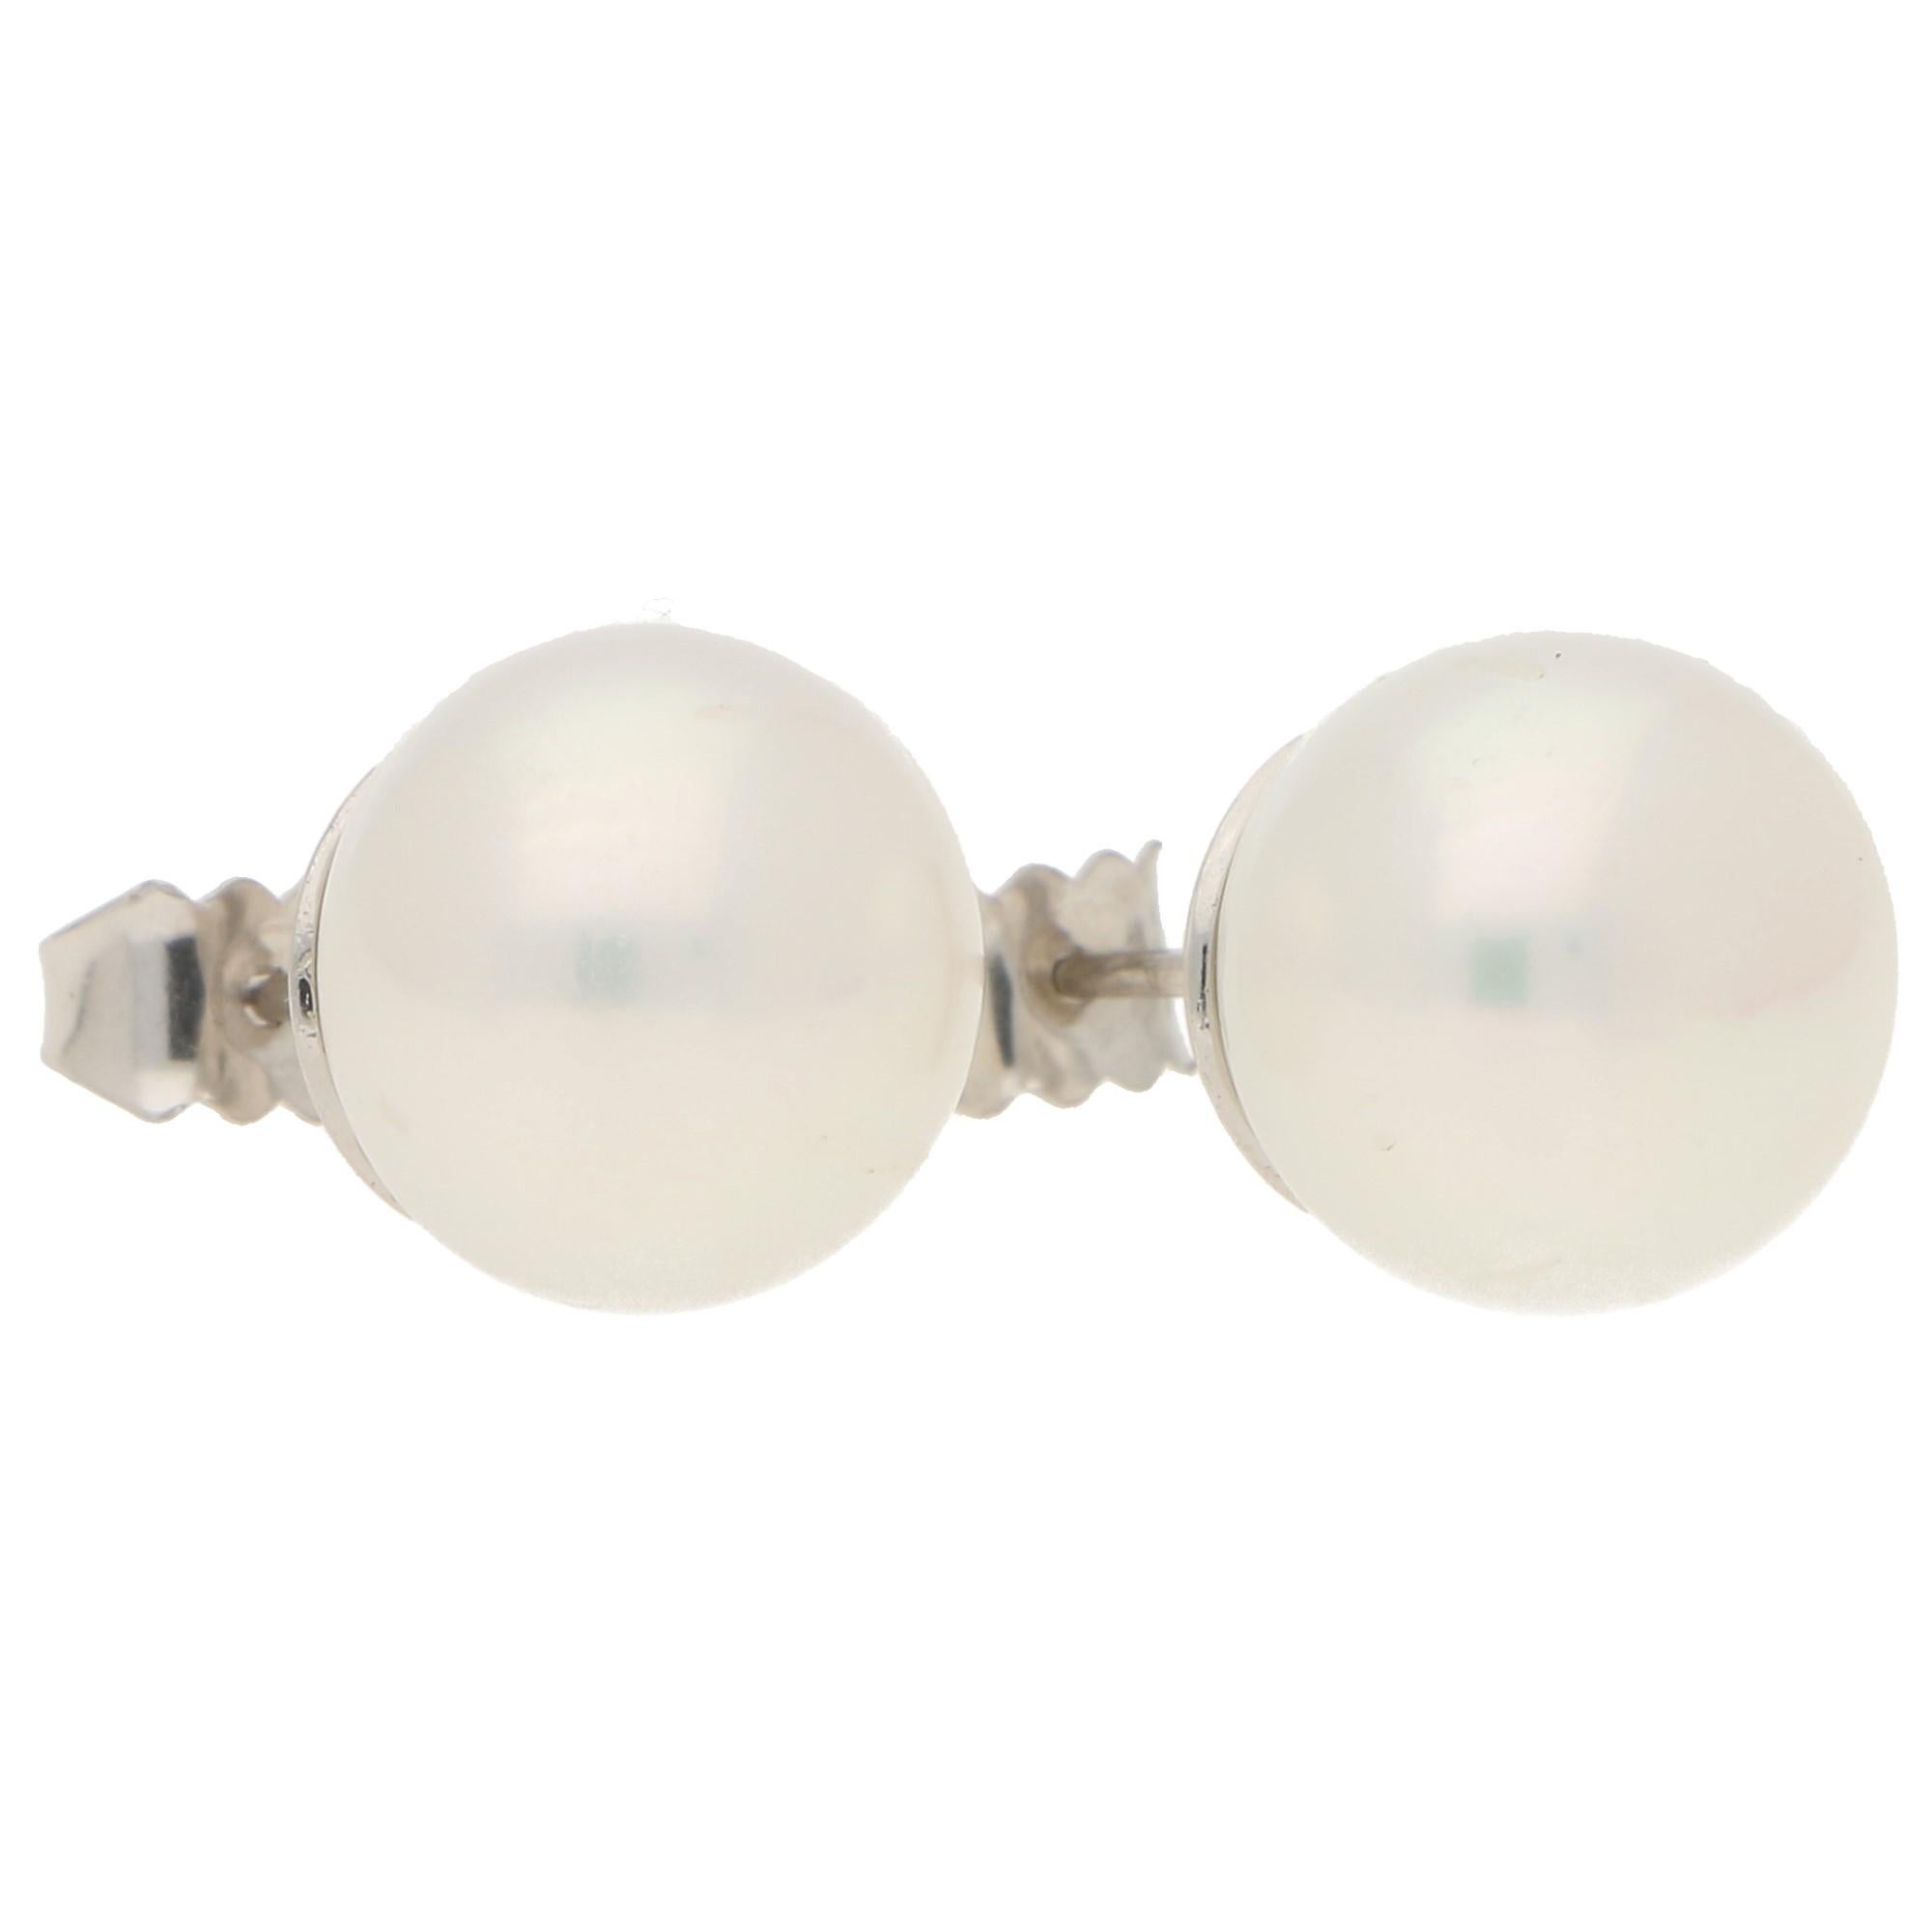  An elegant pair of large freshwater pearls set in 18k white gold. 

Each earring features a lustrous freshwater button pearl of a white colour with a pinkish overtone. 

he earrings are secured to reverse with a post and butterfly fitting. 

For